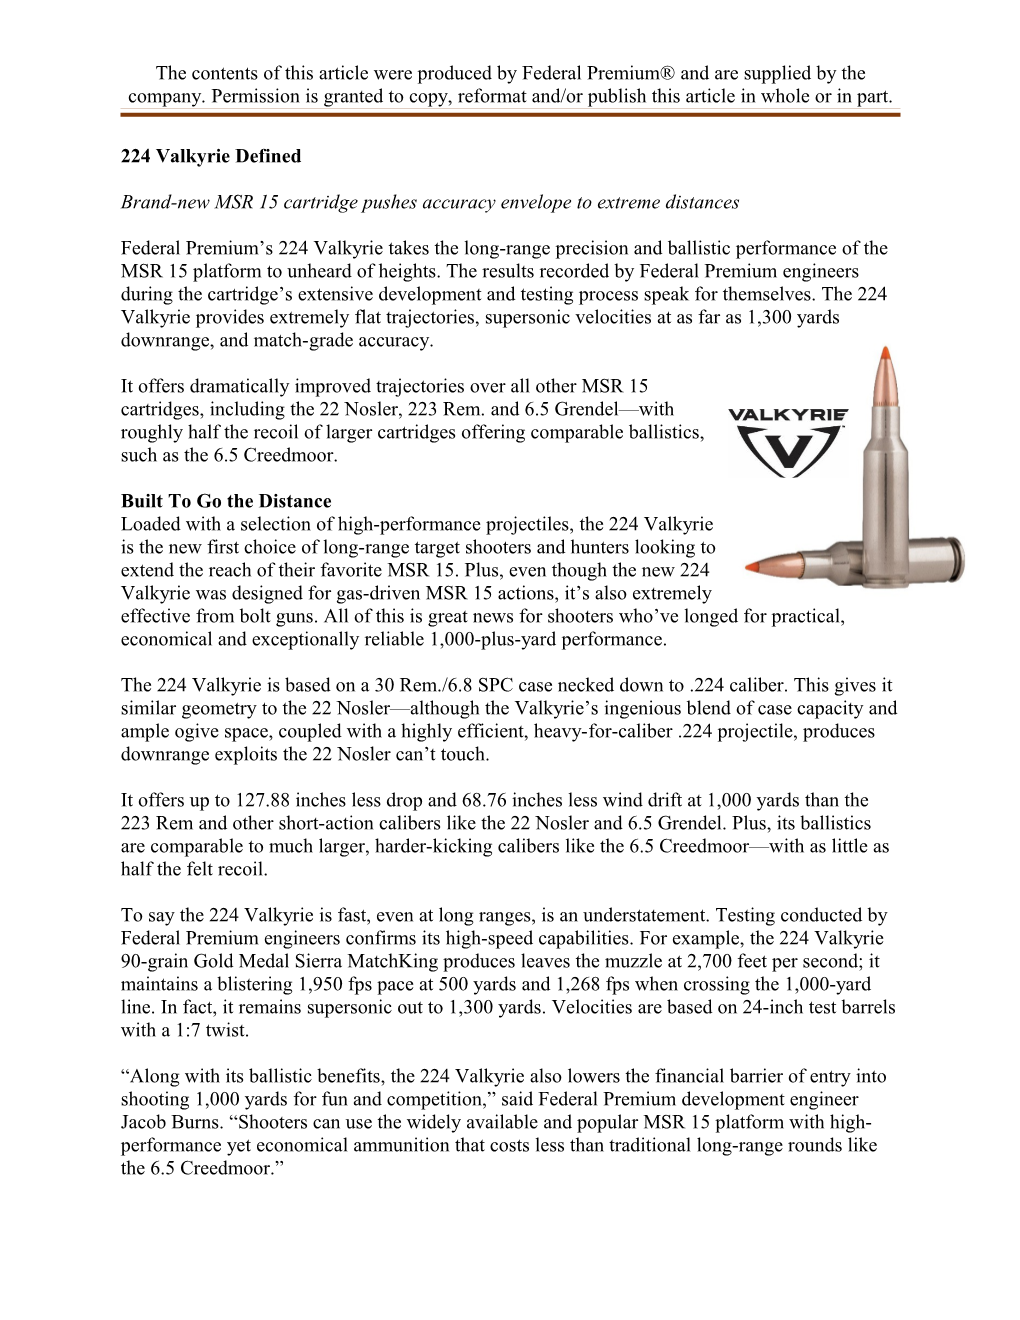 The Contents of This Article Were Produced by Federal Premium and Are Supplied by the Company